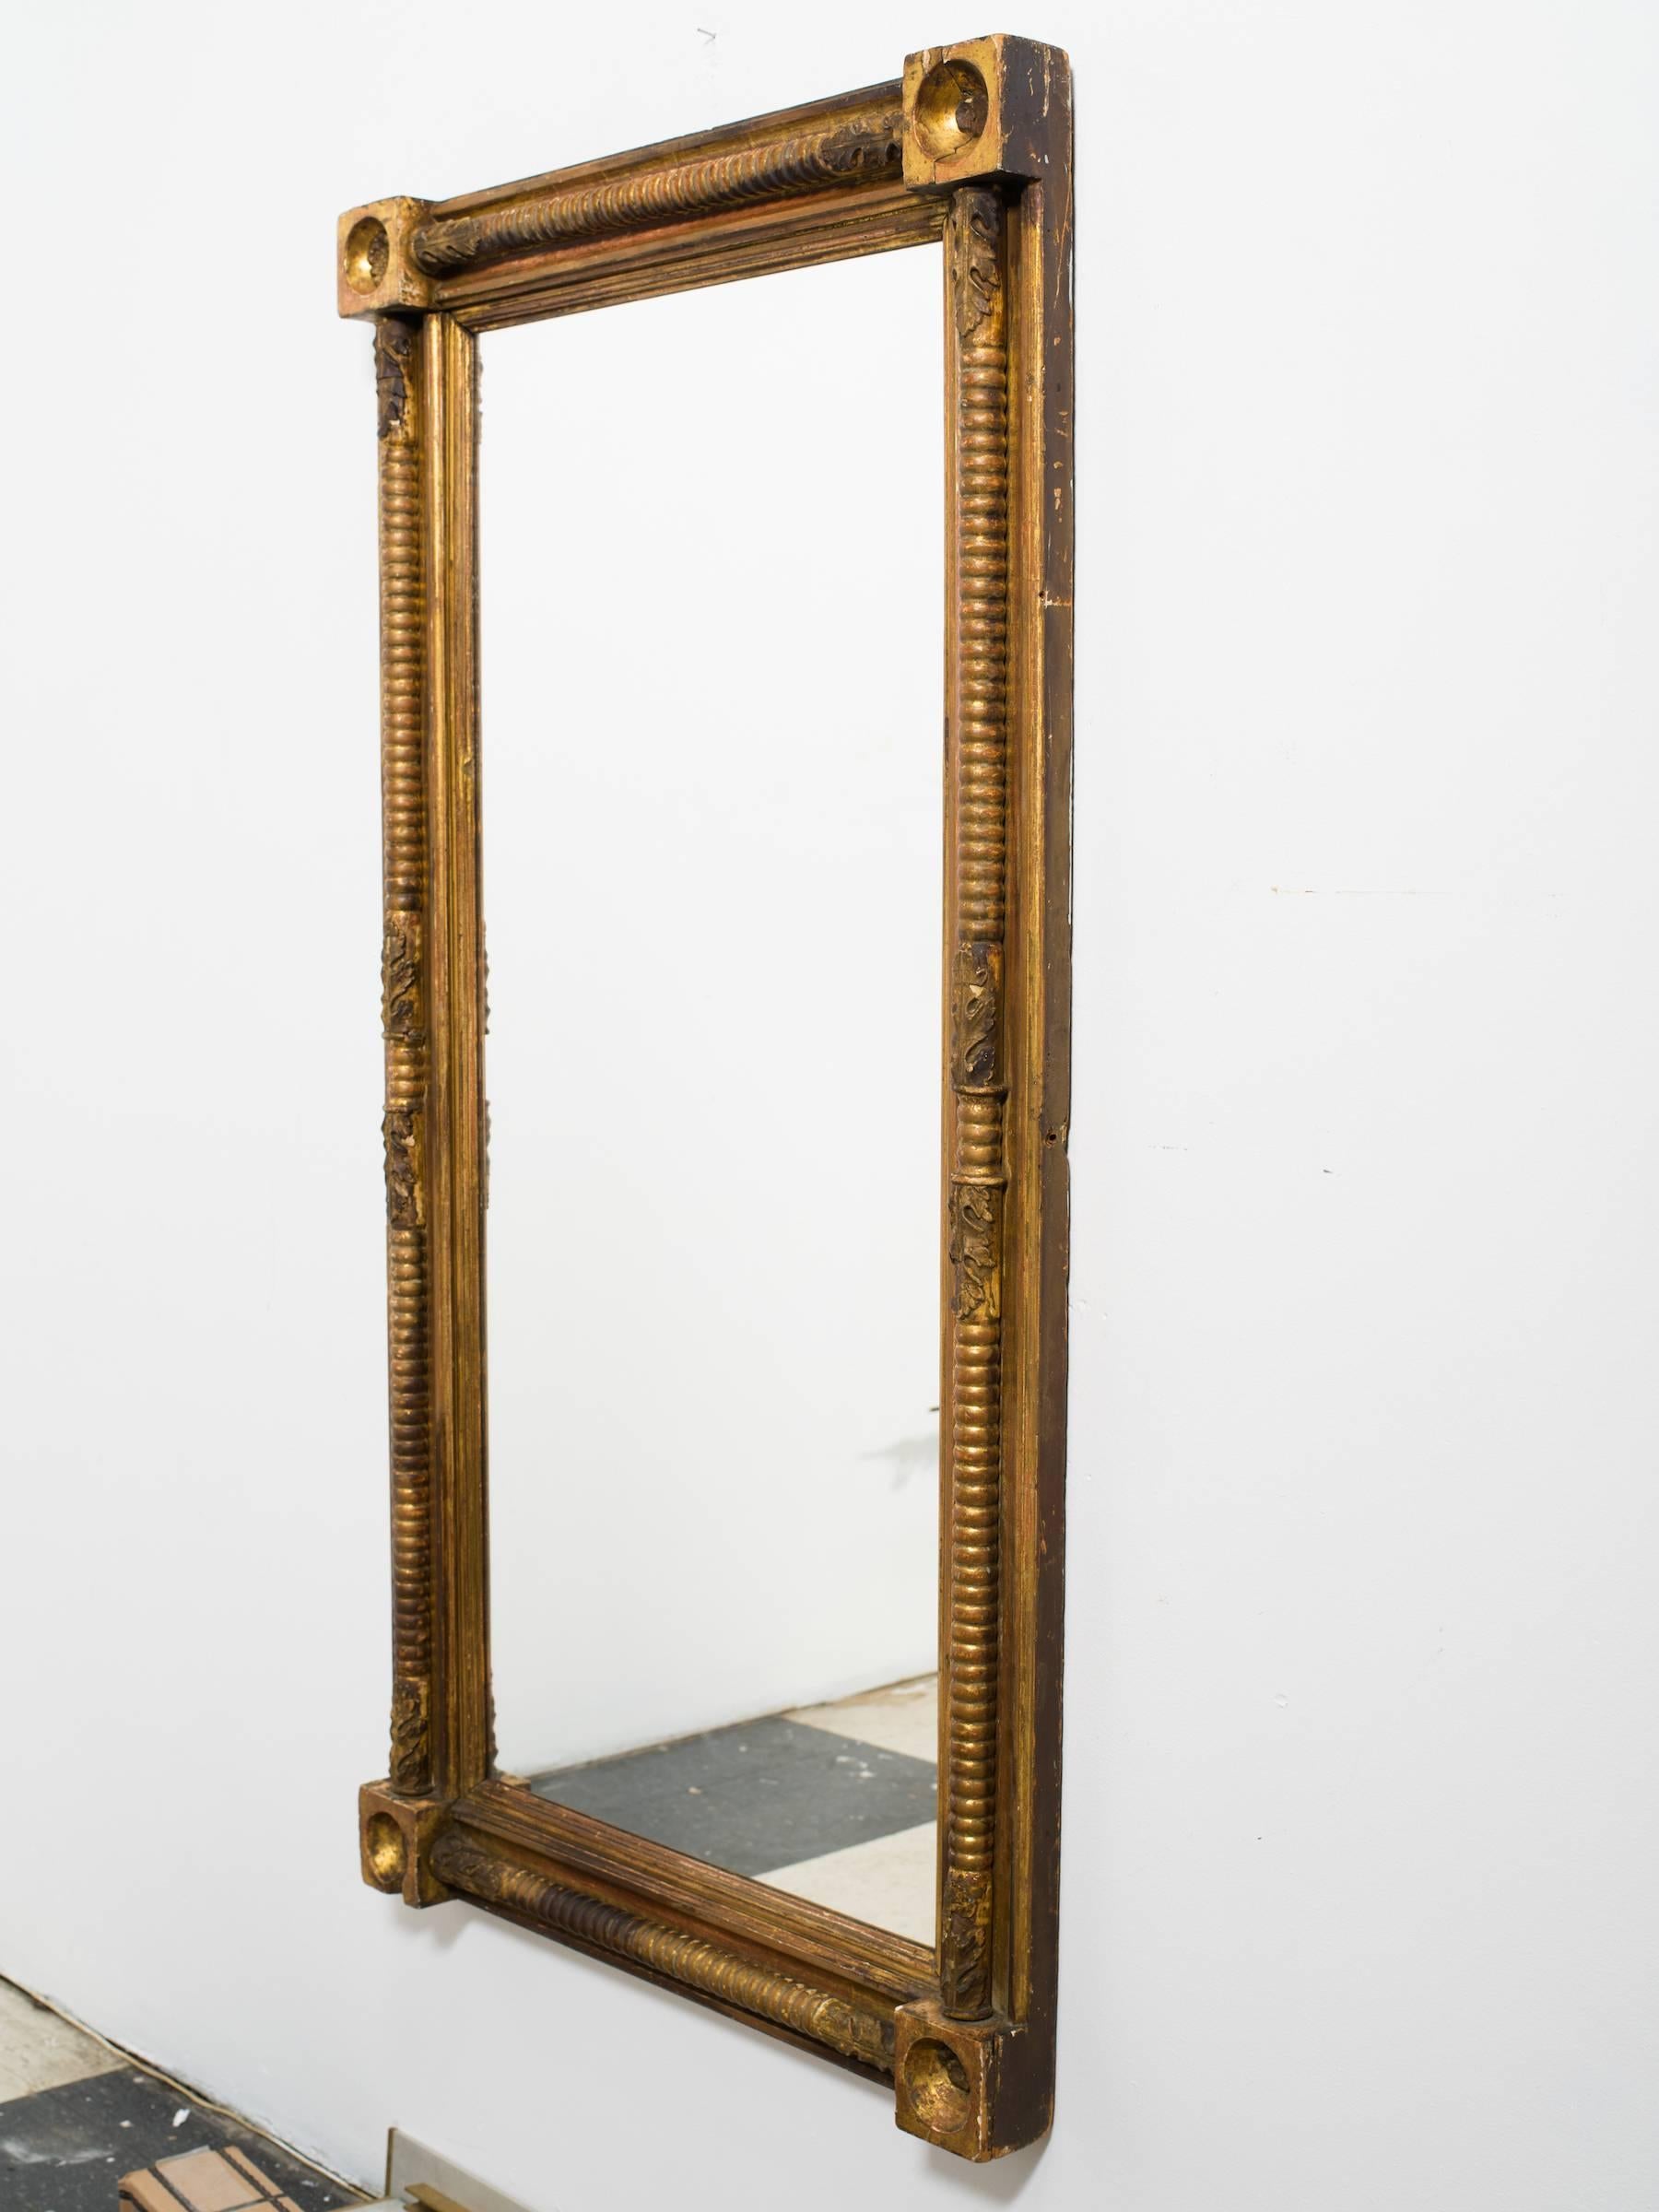 1820s English giltwood mirror. Three florets missing from corners.